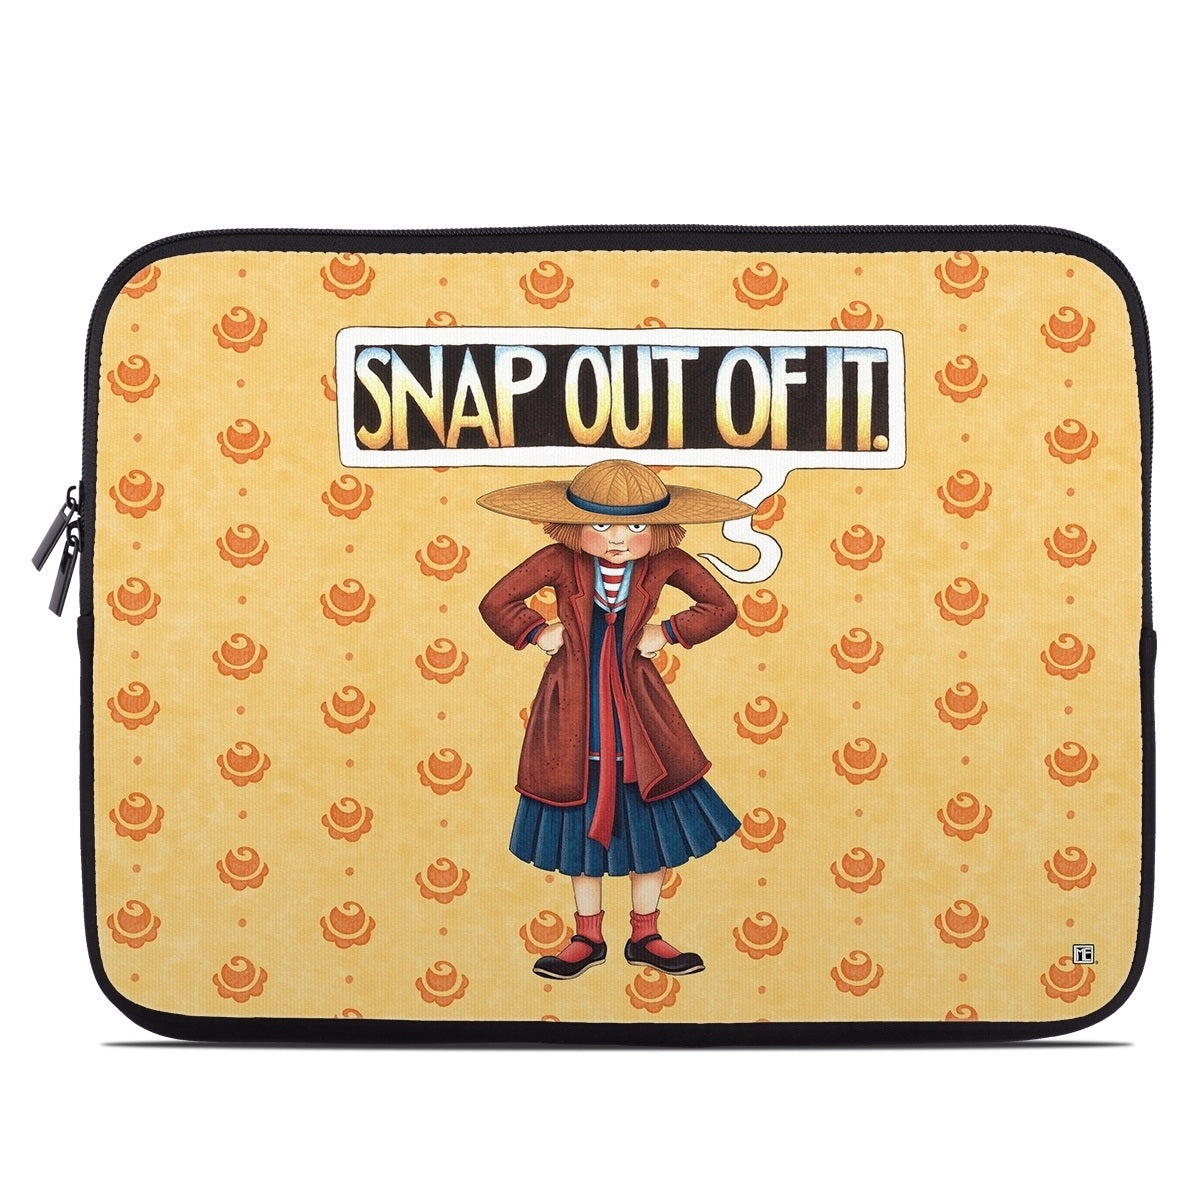 Snap Out Of It - Laptop Sleeve